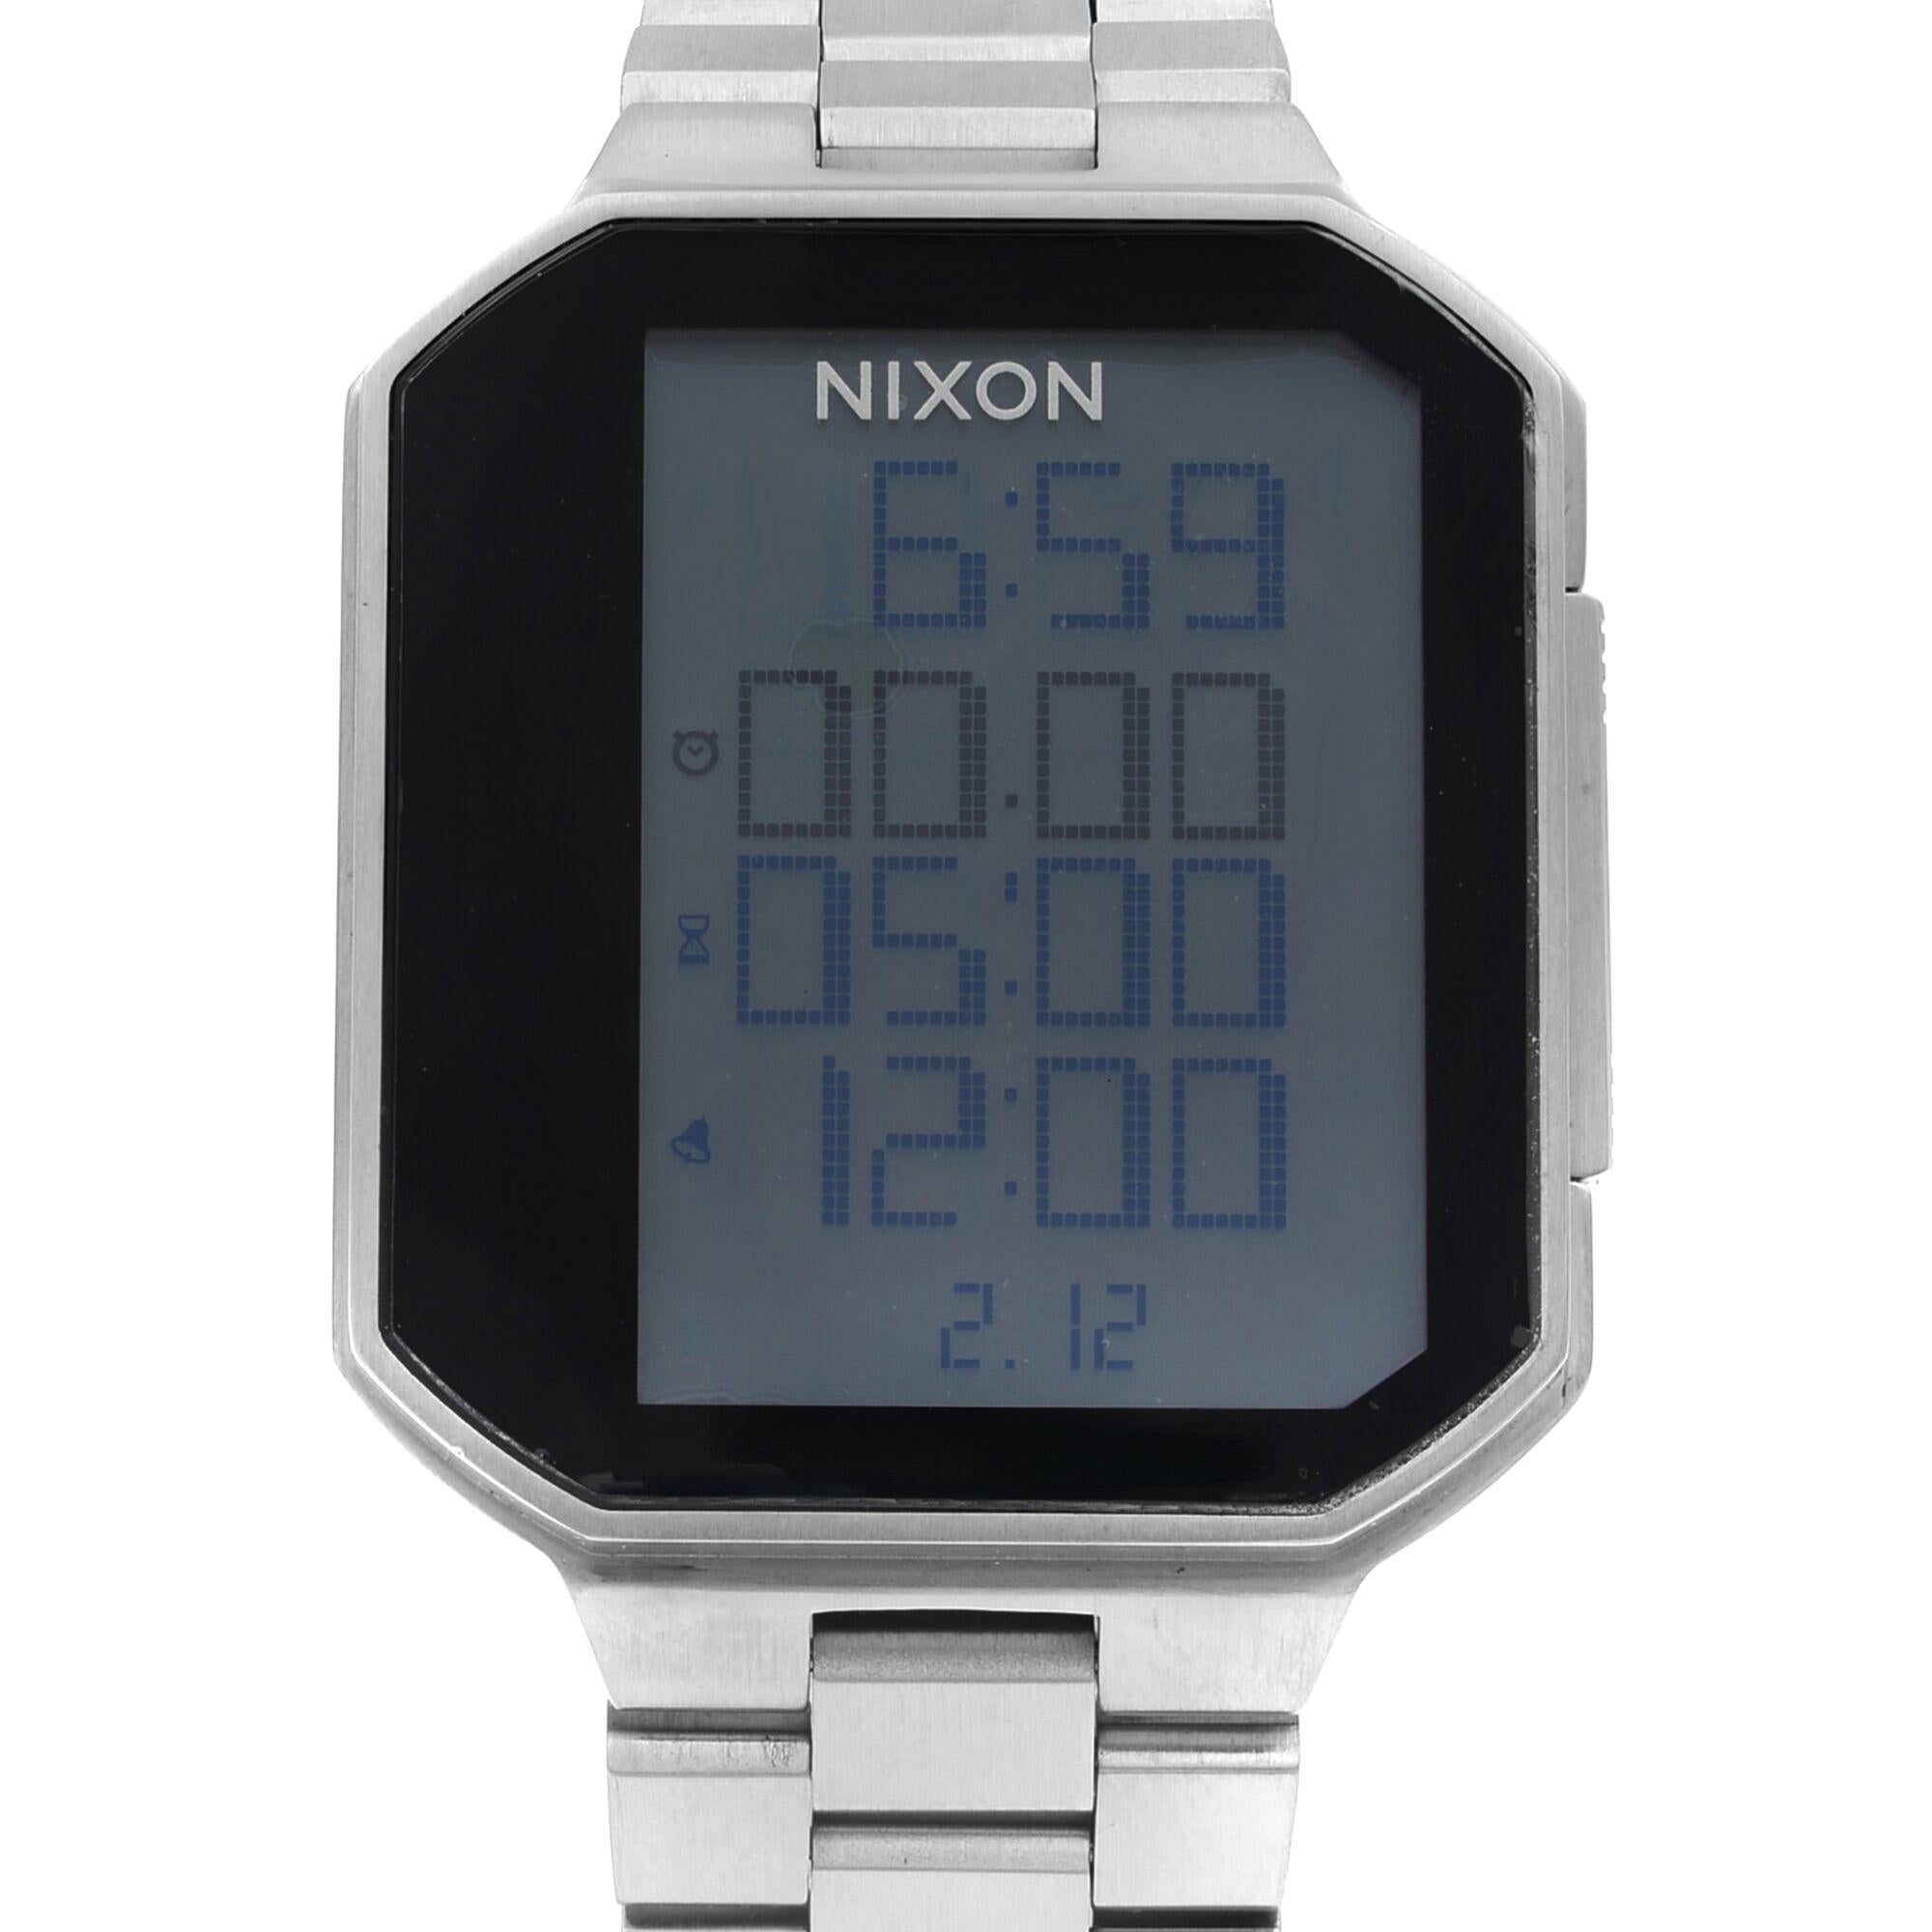 This New Without Tags Nixon  A323-000 is a beautiful men's timepiece that is powered by quartz (battery) movement which is cased in a stainless steel case. It has a  rectangle shape face,  dial and has hand unspecified style markers. It is completed